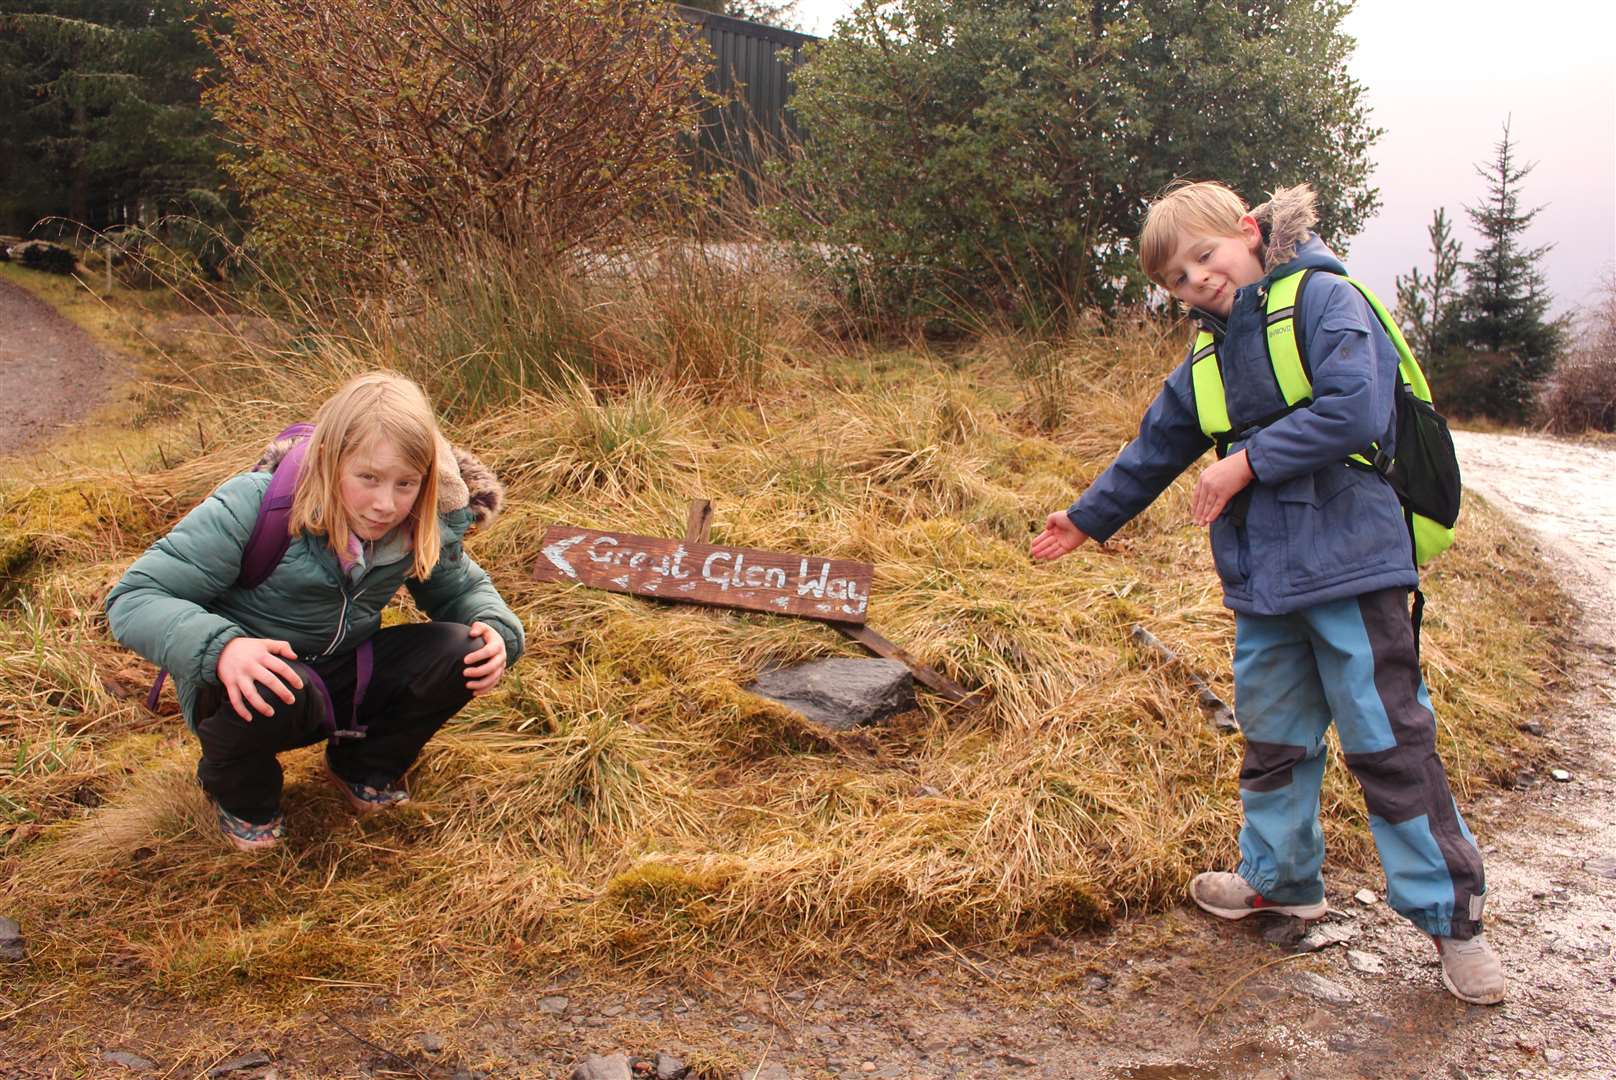 The children find the first Great Glen Way sign.